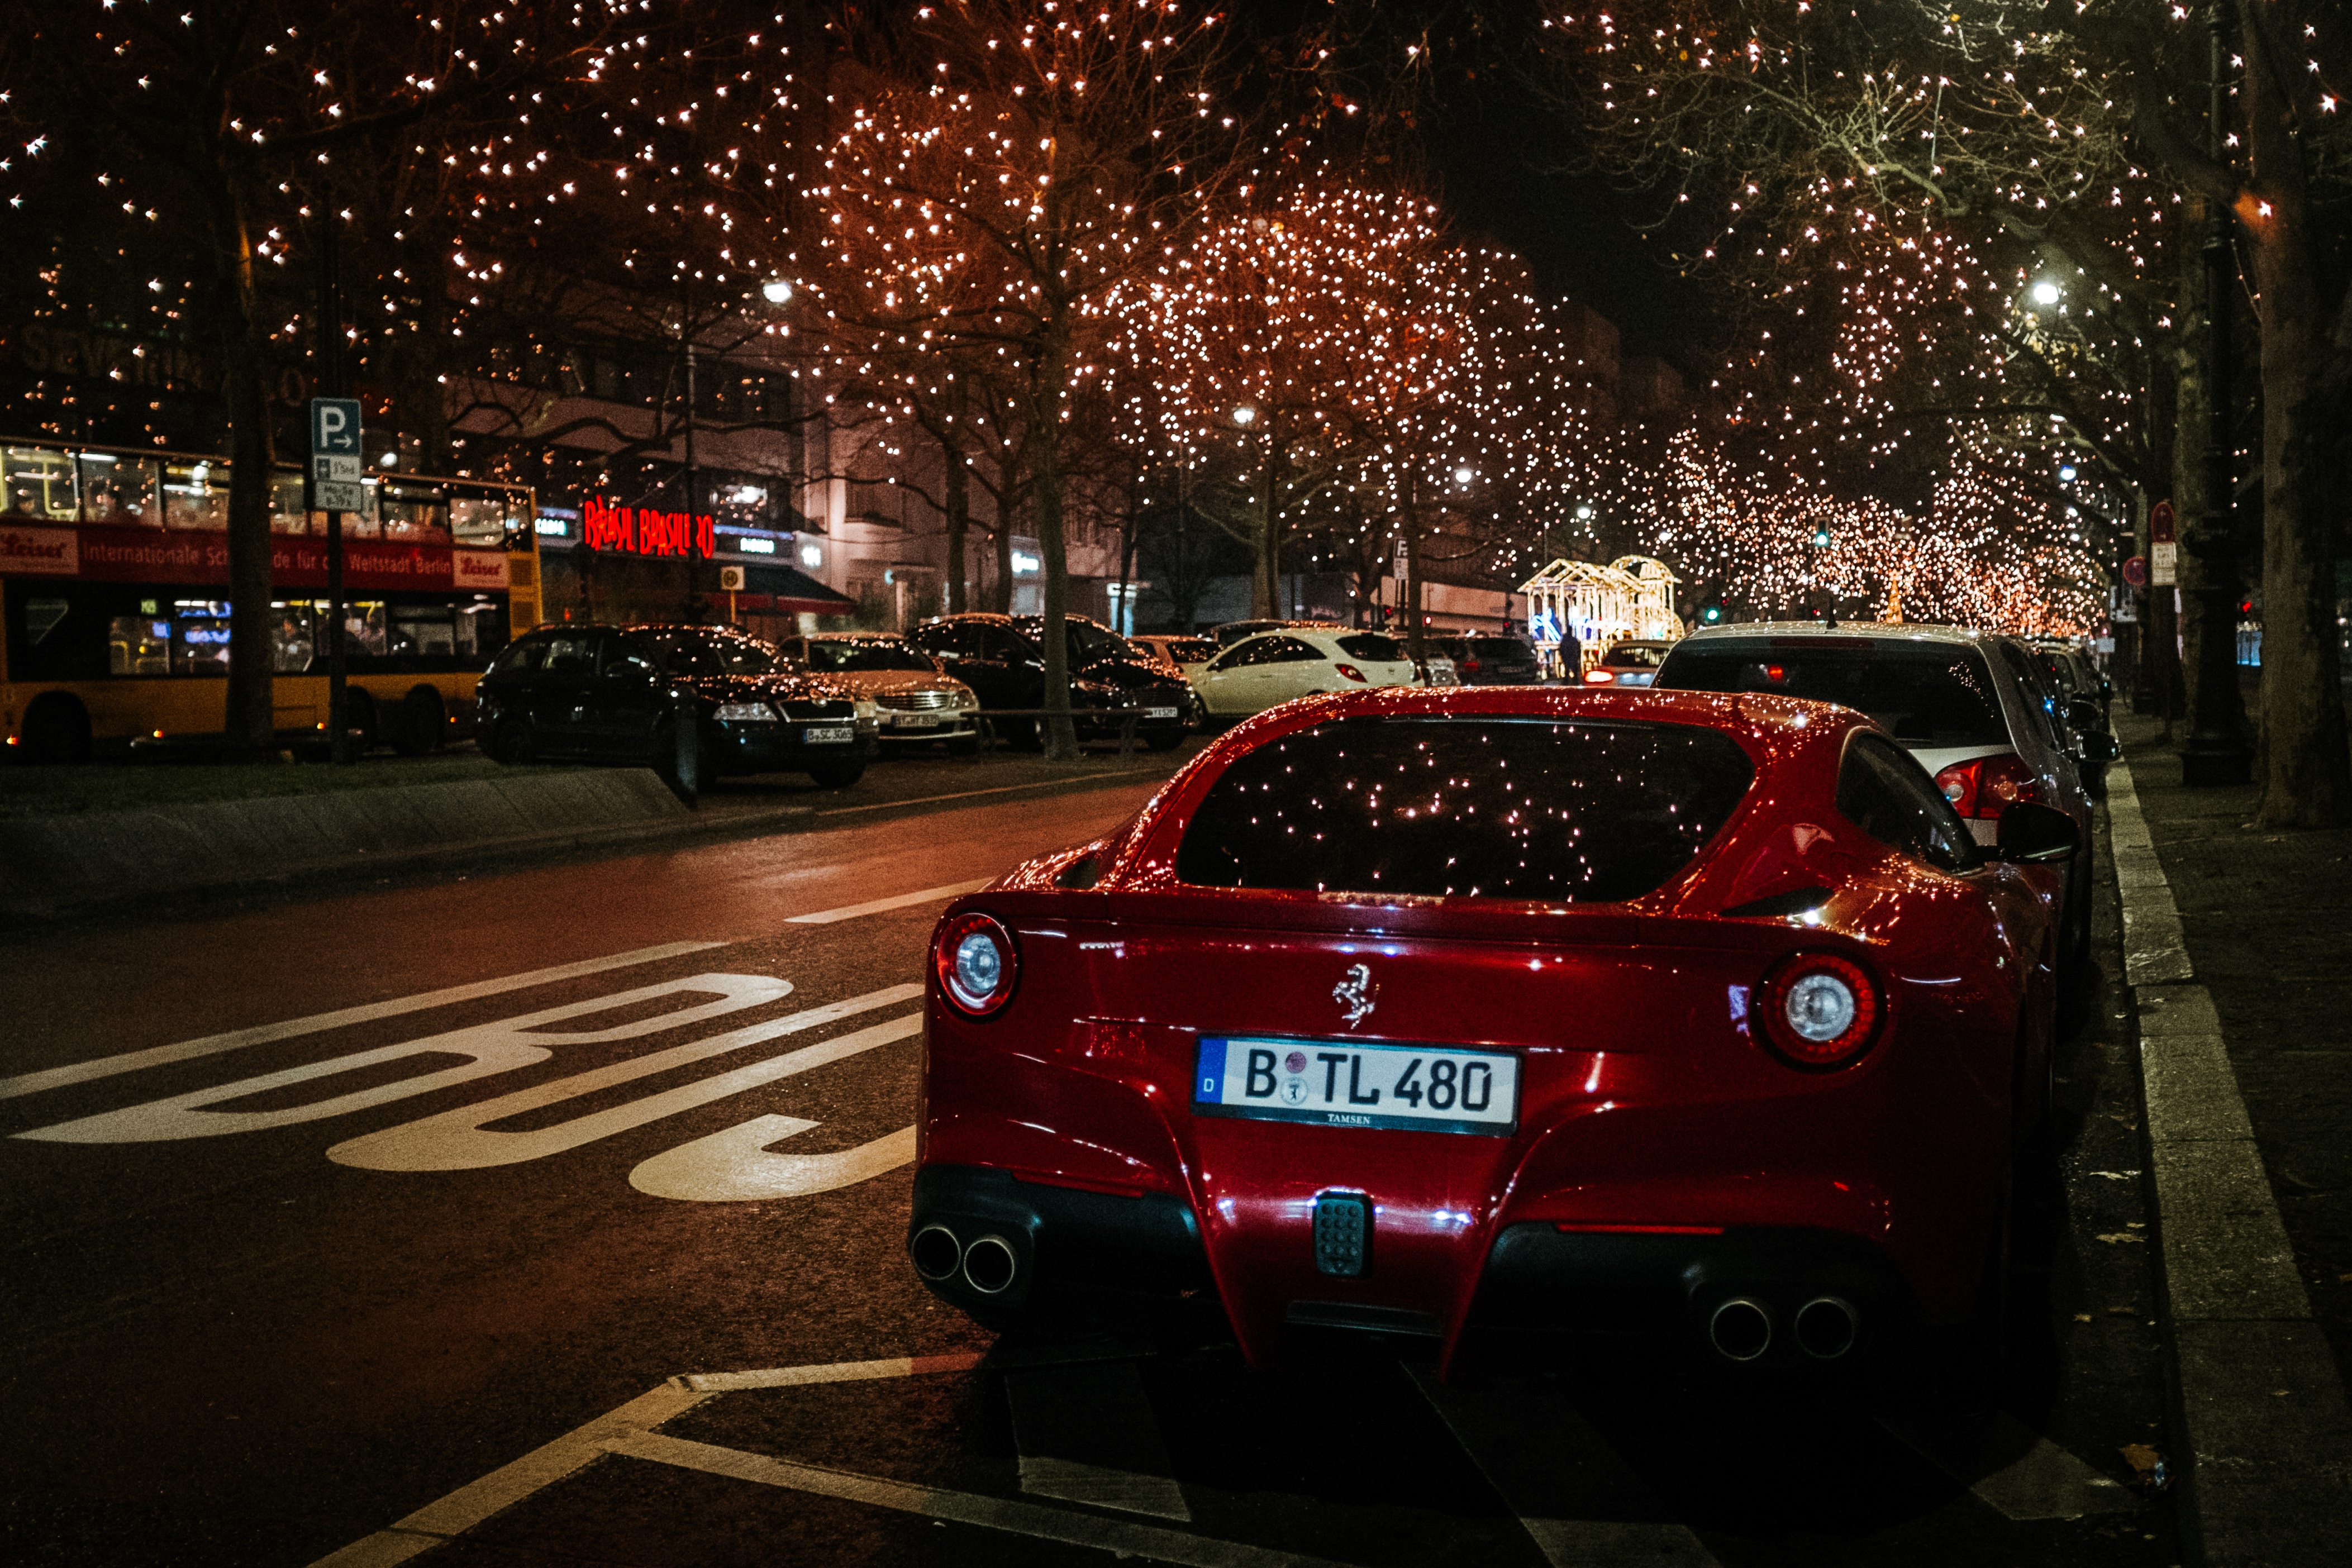 cars, night city, back view, ferrari, red, rear view, scenery